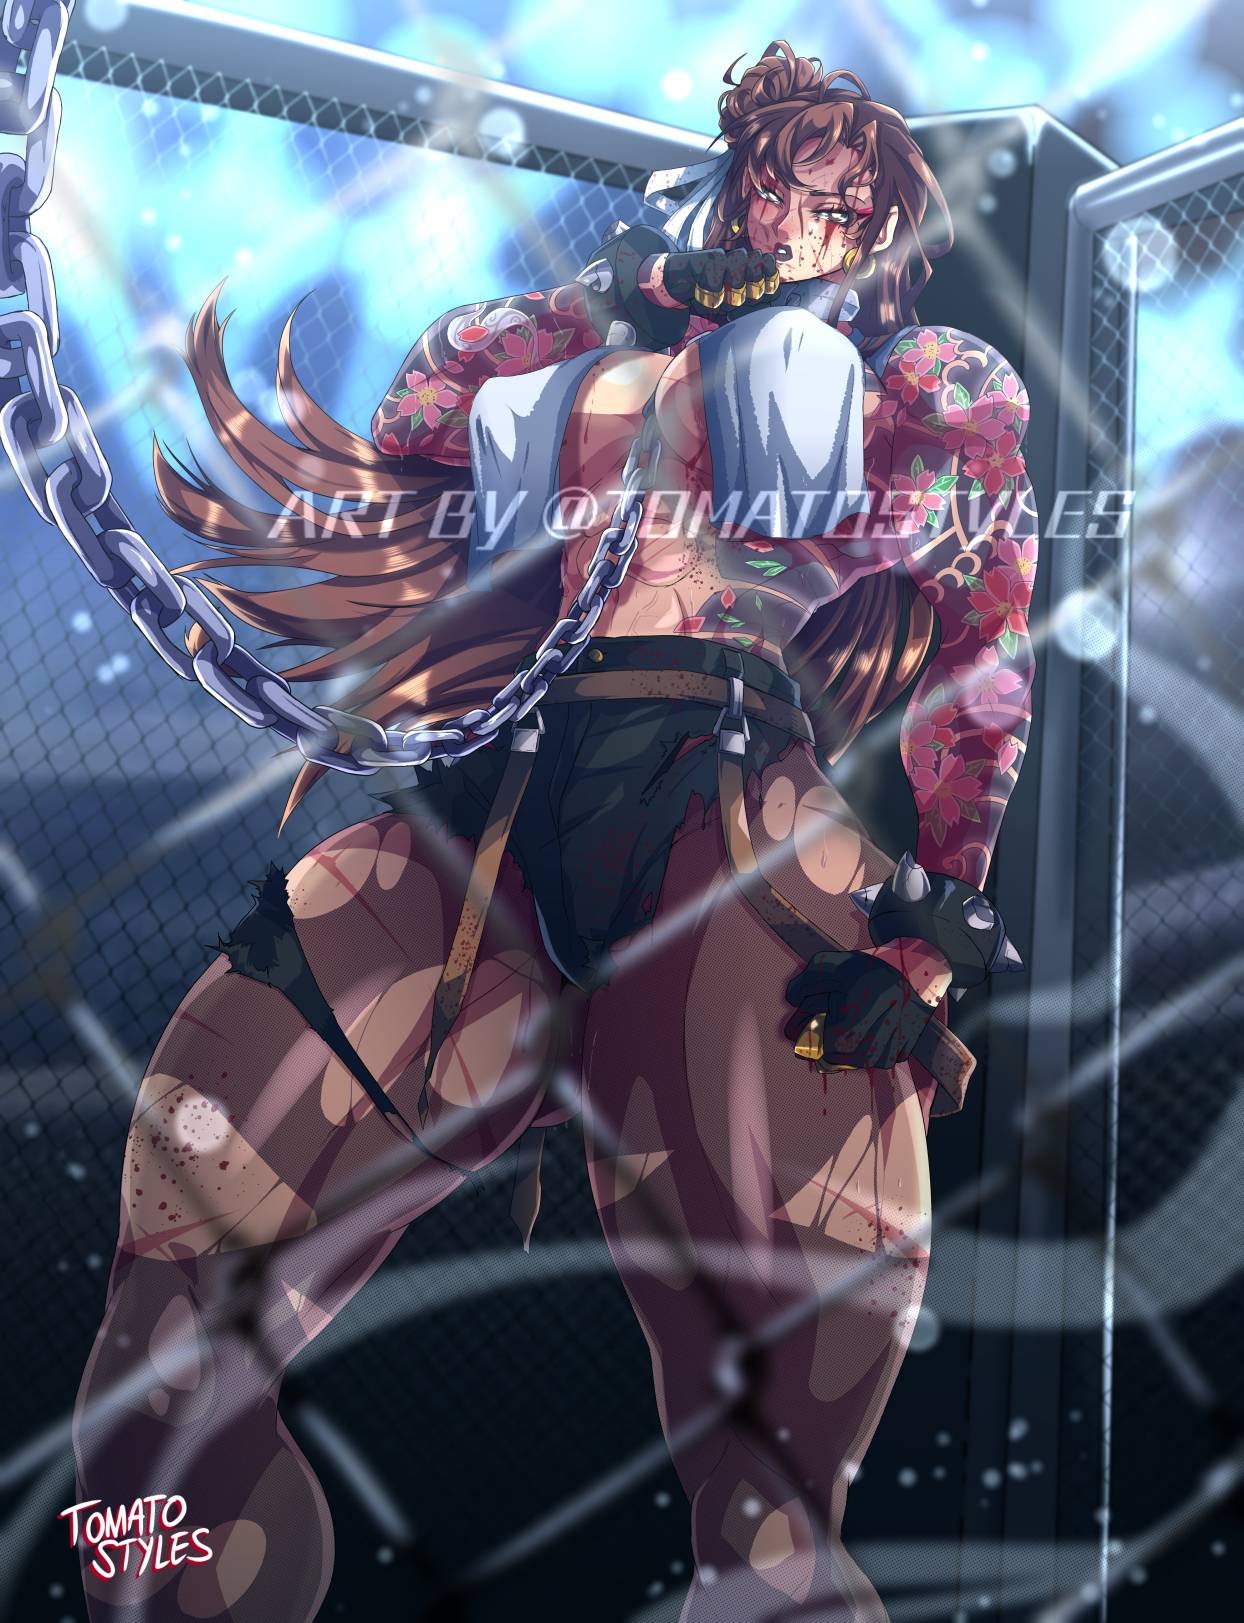 1girls abs alternate_breast_size alternate_costume alternate_hairstyle areola_bulge arm_over_breasts arm_tattoo artist_logo belt belt_buckle belt_straps big_breasts big_thighs black_gloves black_lipstick blood blood_on_face blood_on_hand blood_on_leg bracelet brass_knuckles brown_hair cage cage_match caged chained_collar choker chun-li collar earrings eyelashes eyeliner eyeshadow female female_only fence fight fighting_ring flower_tattoo gloves gray_eyes grey_eyes hair_blowing hair_bun hand_over_breast hoop_earrings hourglass_figure irezumi jean_shorts knuckle_duster lipstick long_hair looking_away messy_hair muscle_mommy muscular muscular_thighs muscular_woman perky_nipples pink_eyeshadow pov ribbon ribbon_in_hair ripped_clothing ripped_jeans ripped_pants ripped_tights round_breasts scars scars_on_legs scars_on_thighs shiny_skin shorts solo solo_female spiked_bracelet street_fighter tattoo tattoo_sleeve tattooed_arm tattoos thick_legs thick_thighs tights tomatostyles towel towel_over_breasts twitter_username watermark wiping_mouth wiping_sweat yakuza_girl yakuza_tattoo